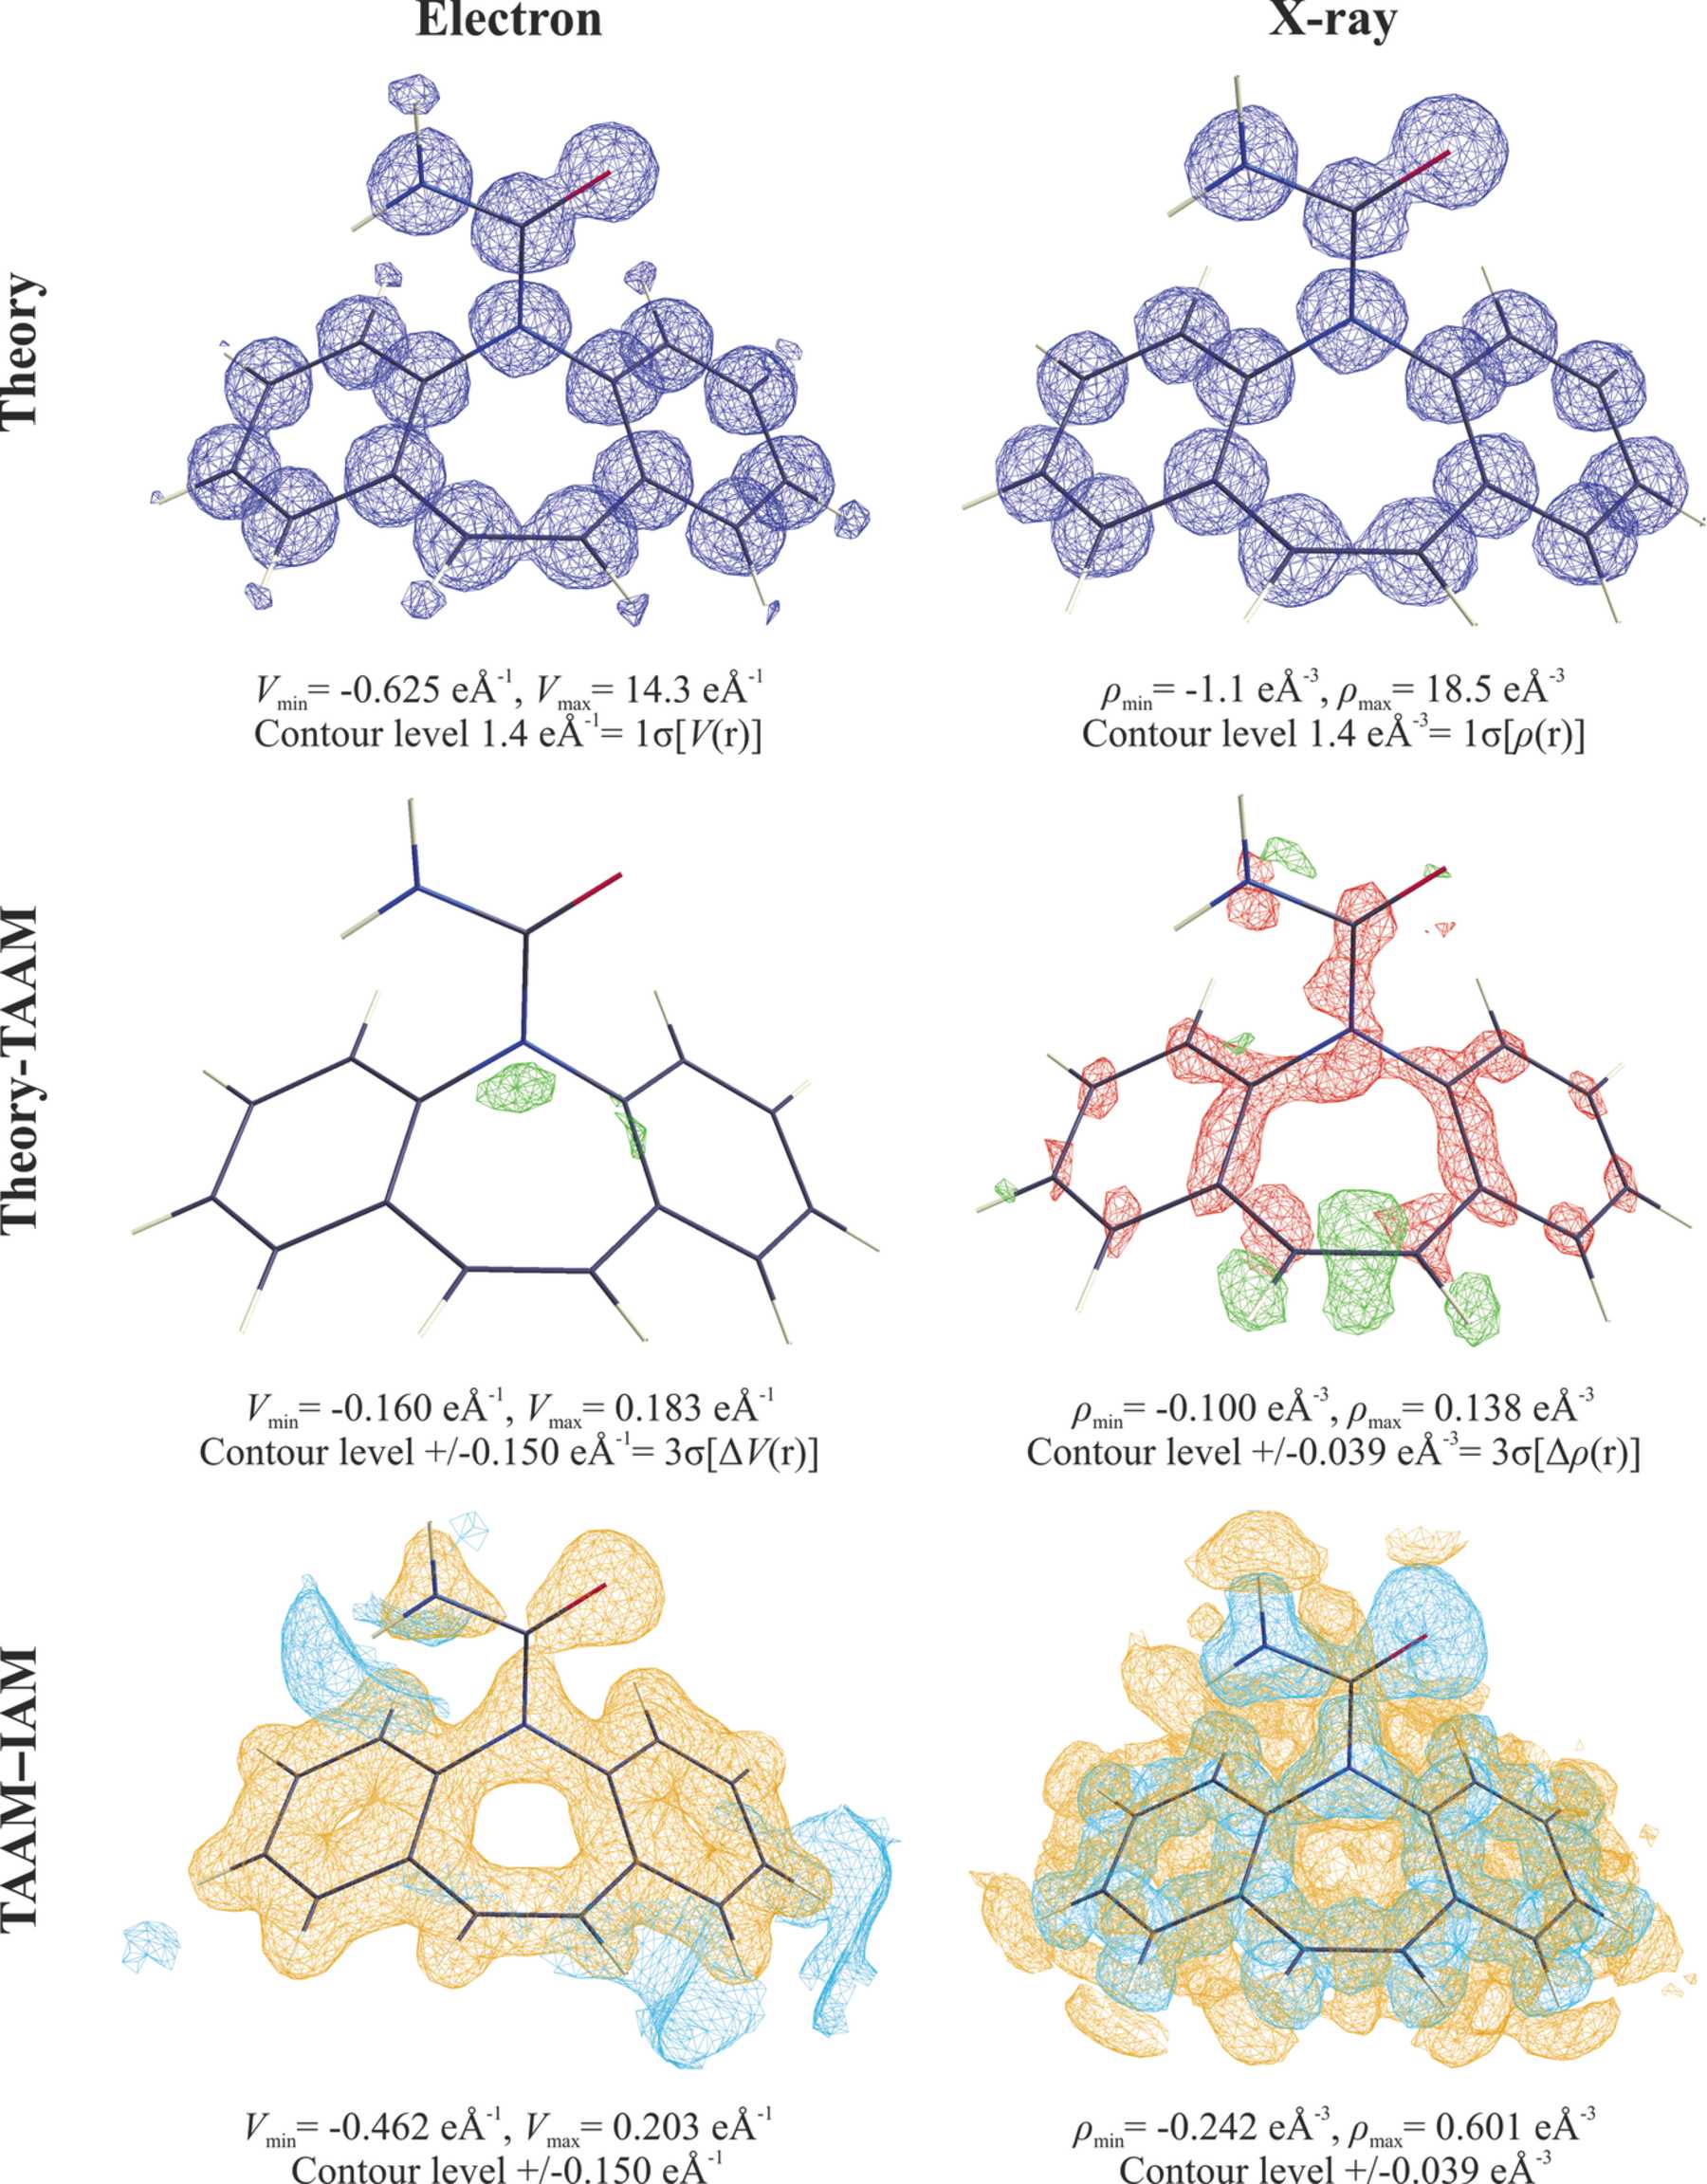 Iucr Refinement Of Organic Crystal Structures With Multipolar Electron Scattering Factors